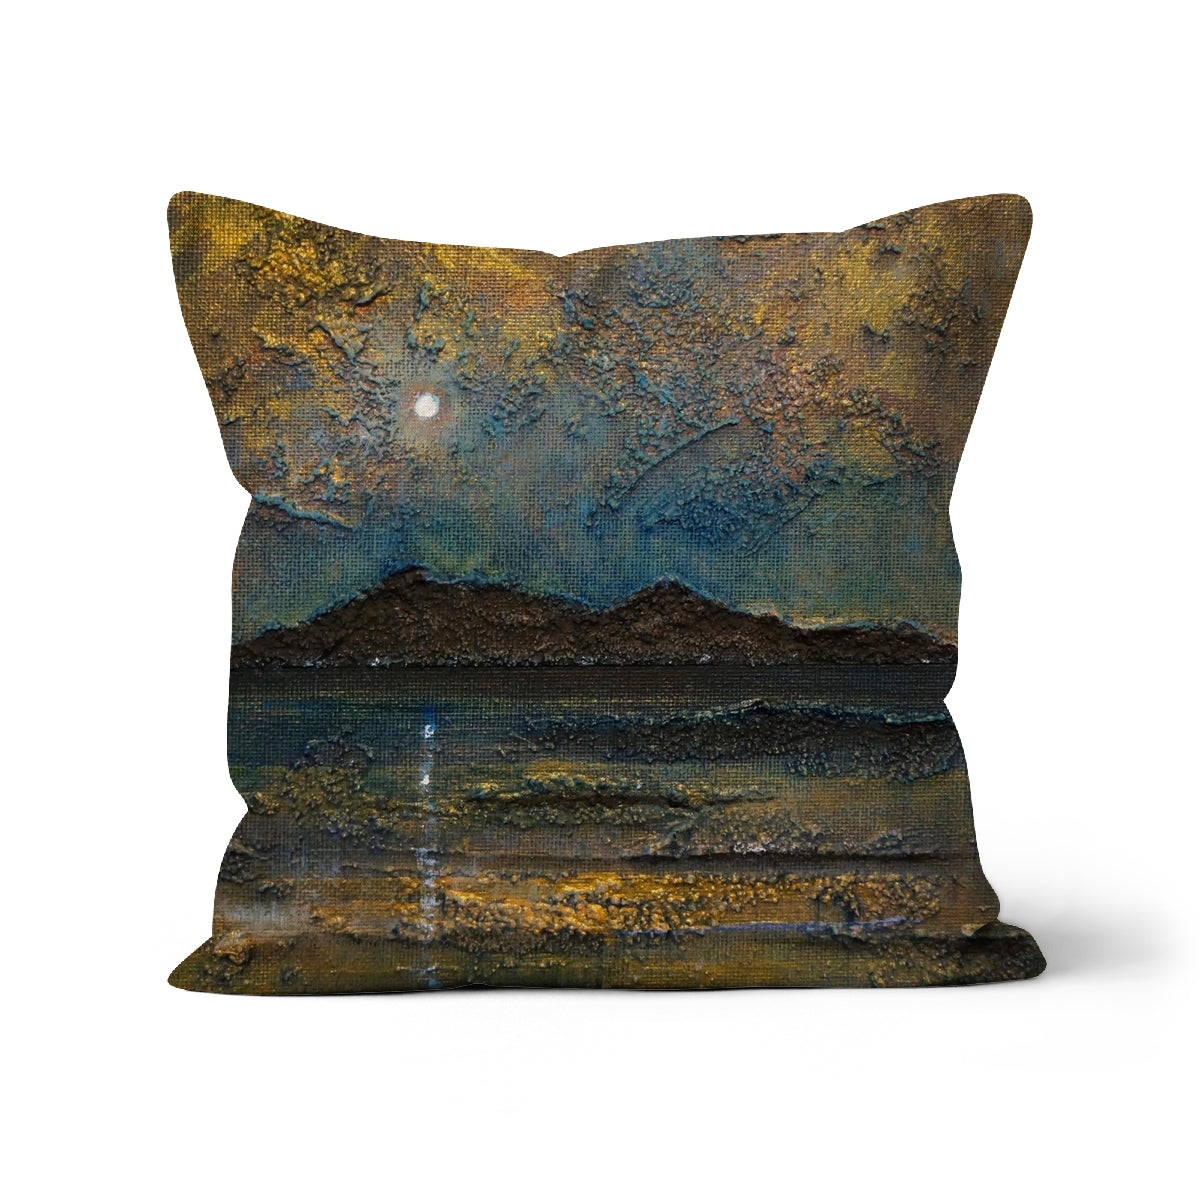 Arran Moonlight Art Gifts Cushion-Cushions-Arran Art Gallery-Faux Suede-16"x16"-Paintings, Prints, Homeware, Art Gifts From Scotland By Scottish Artist Kevin Hunter